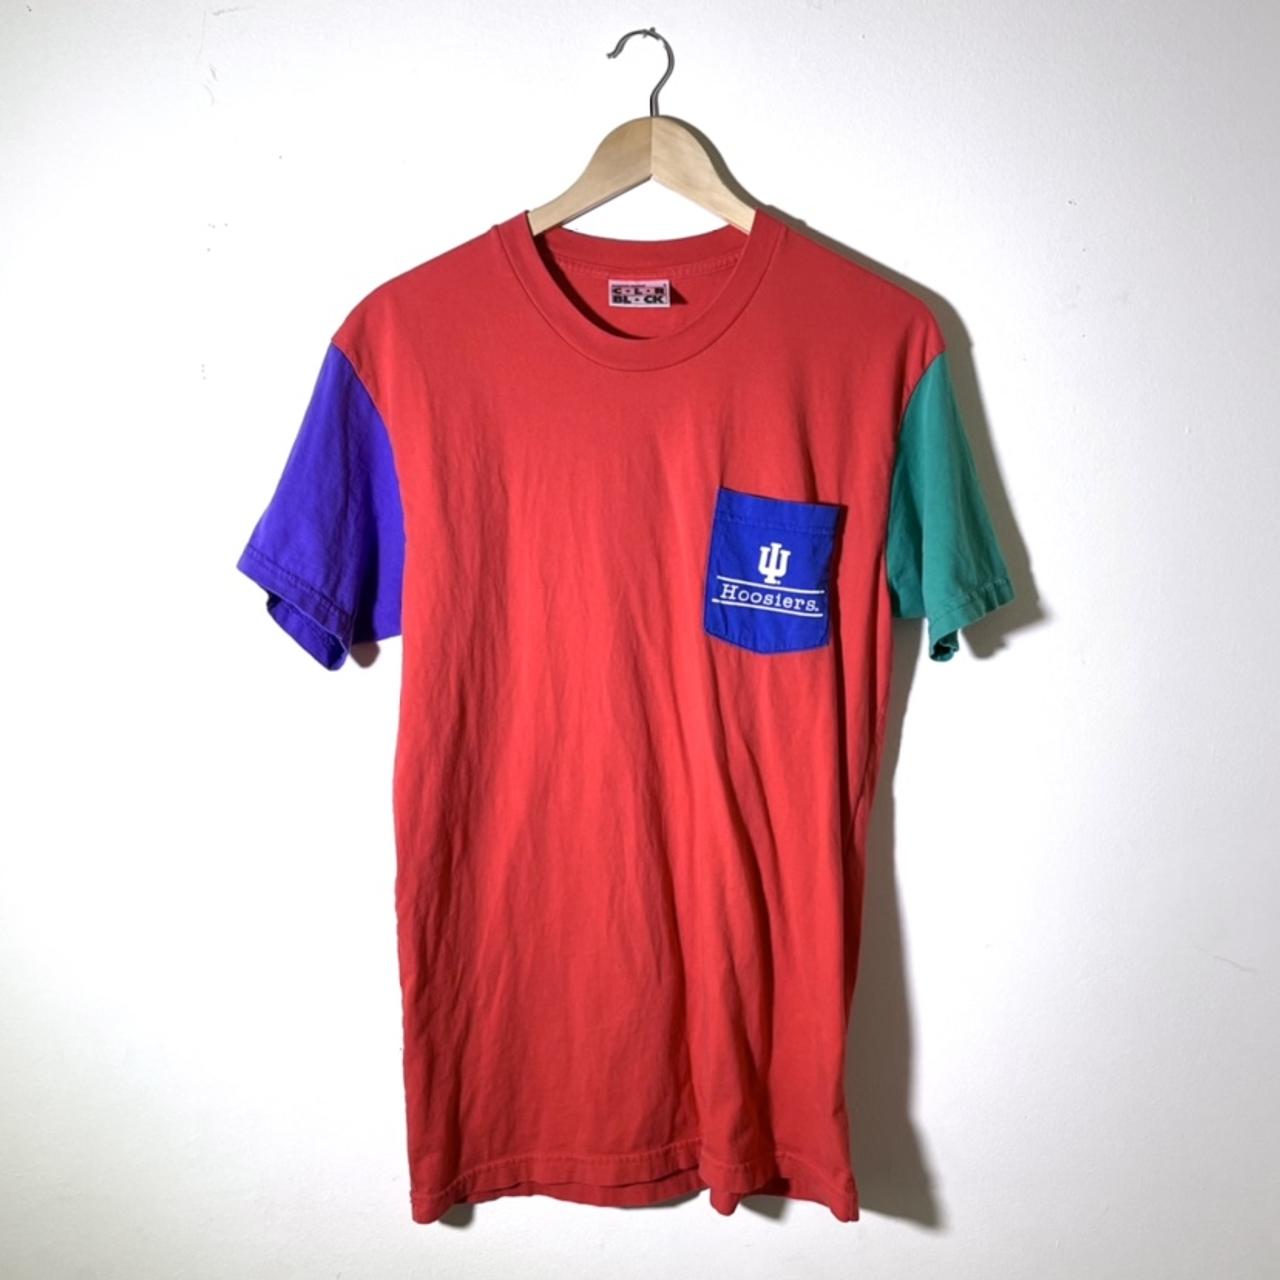 American Apparel Men's Red and Purple T-shirt